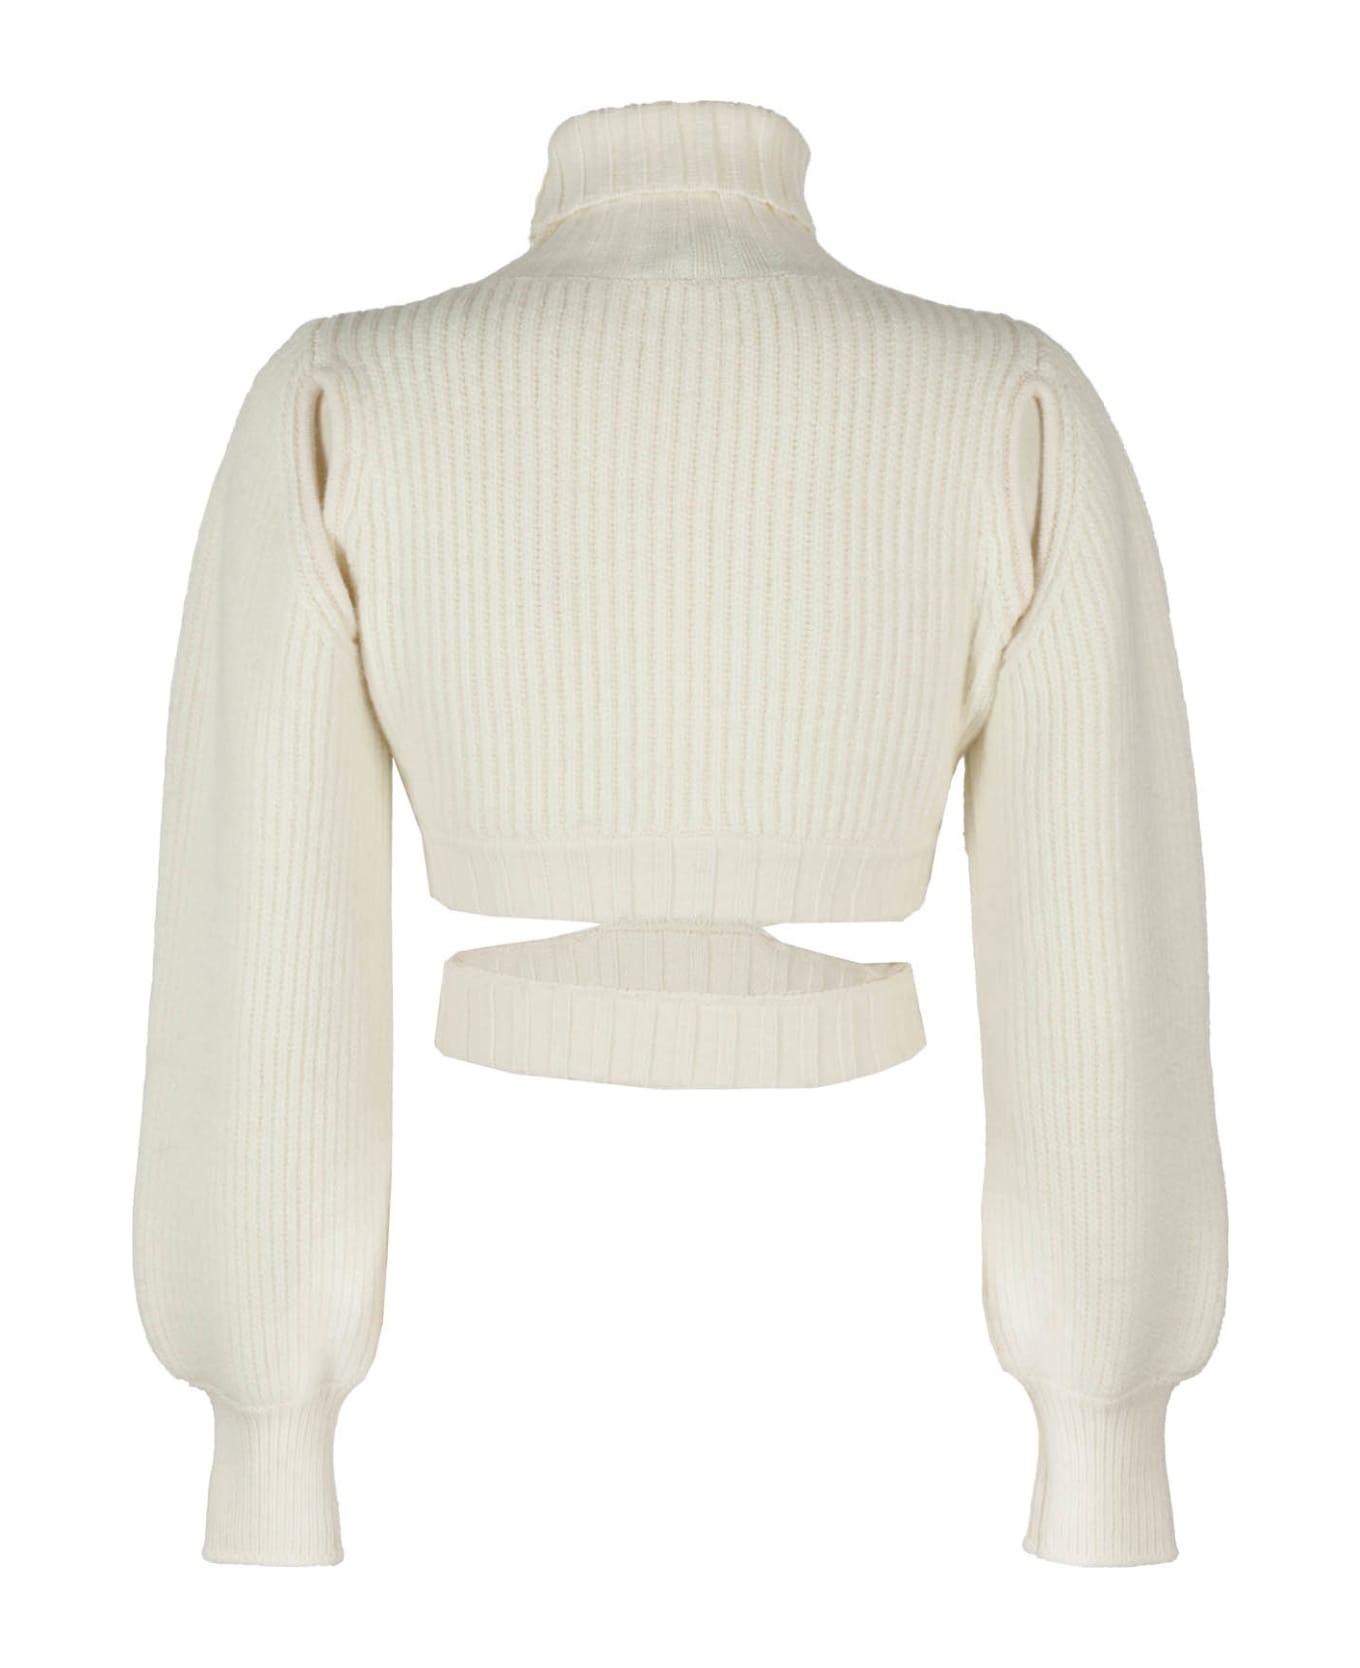 ANDREĀDAMO Ribbed Knit Crop Sweater